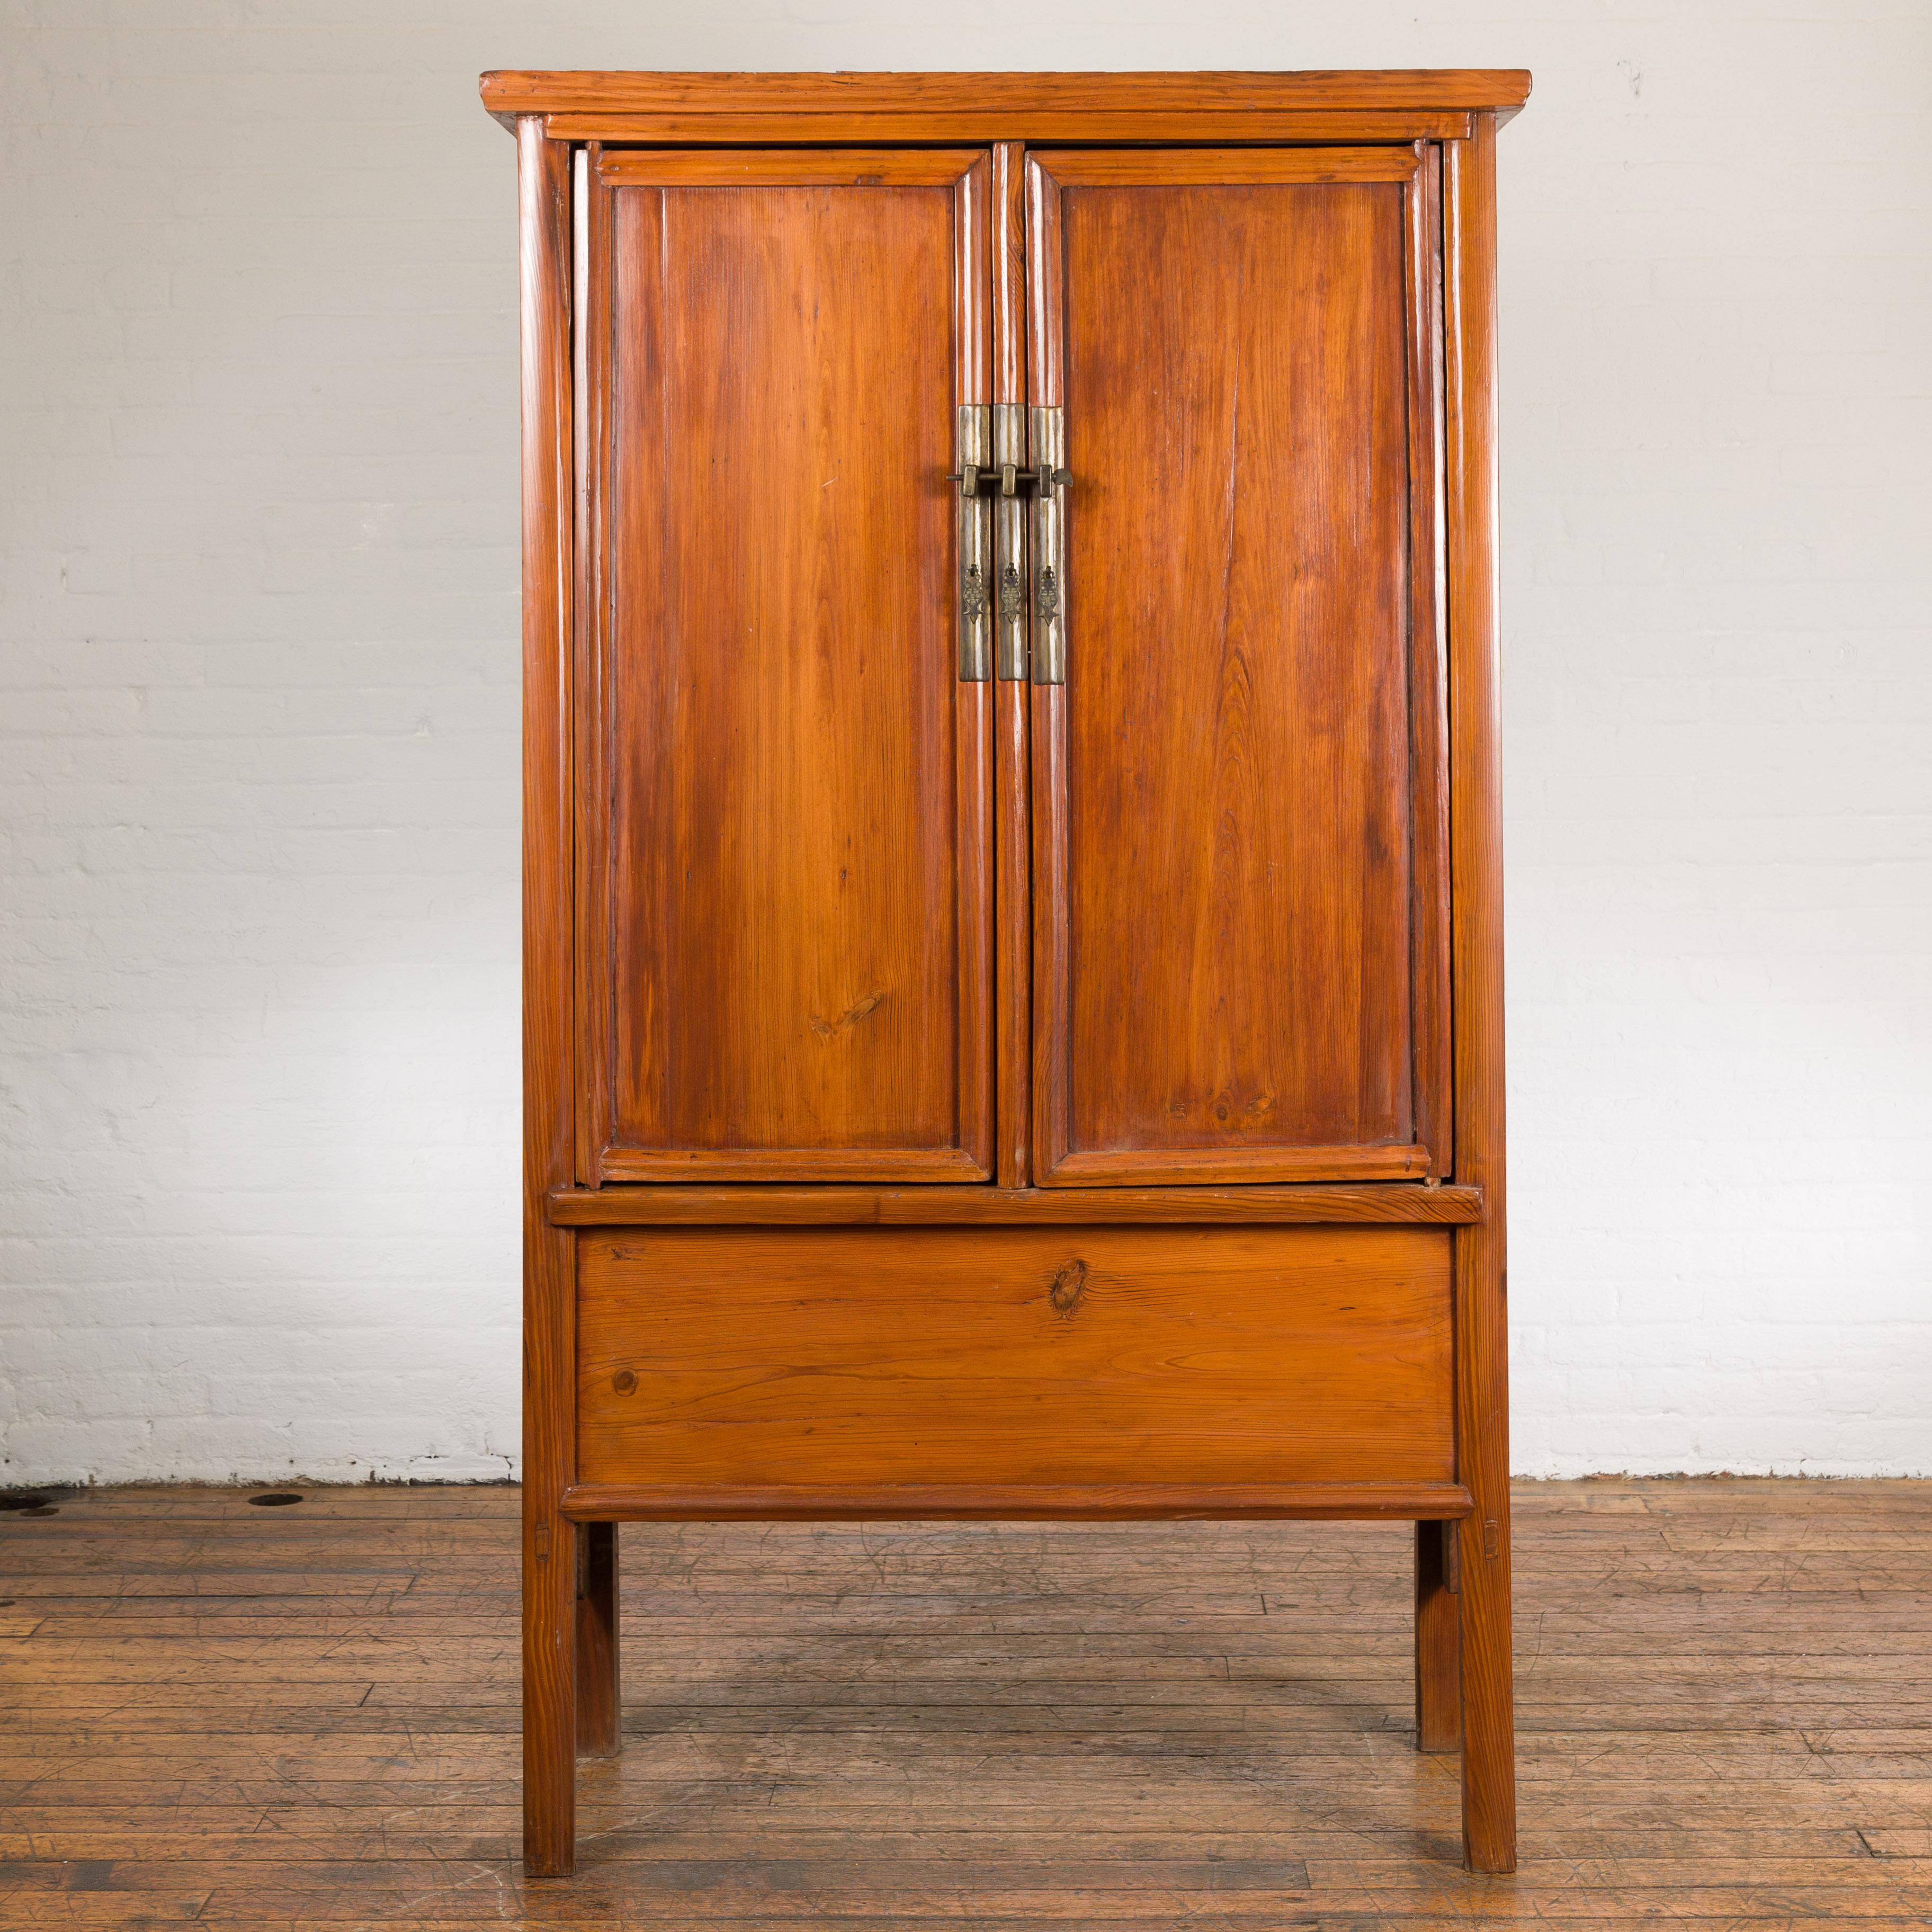 Chinese late Qing Dynasty period noodle cabinet from the early 20th century with two doors, tapered lines, brass hardware, lateral carved aprons, hidden drawers on the inside as well as a removable panel. Emanating an aura of timeless elegance and